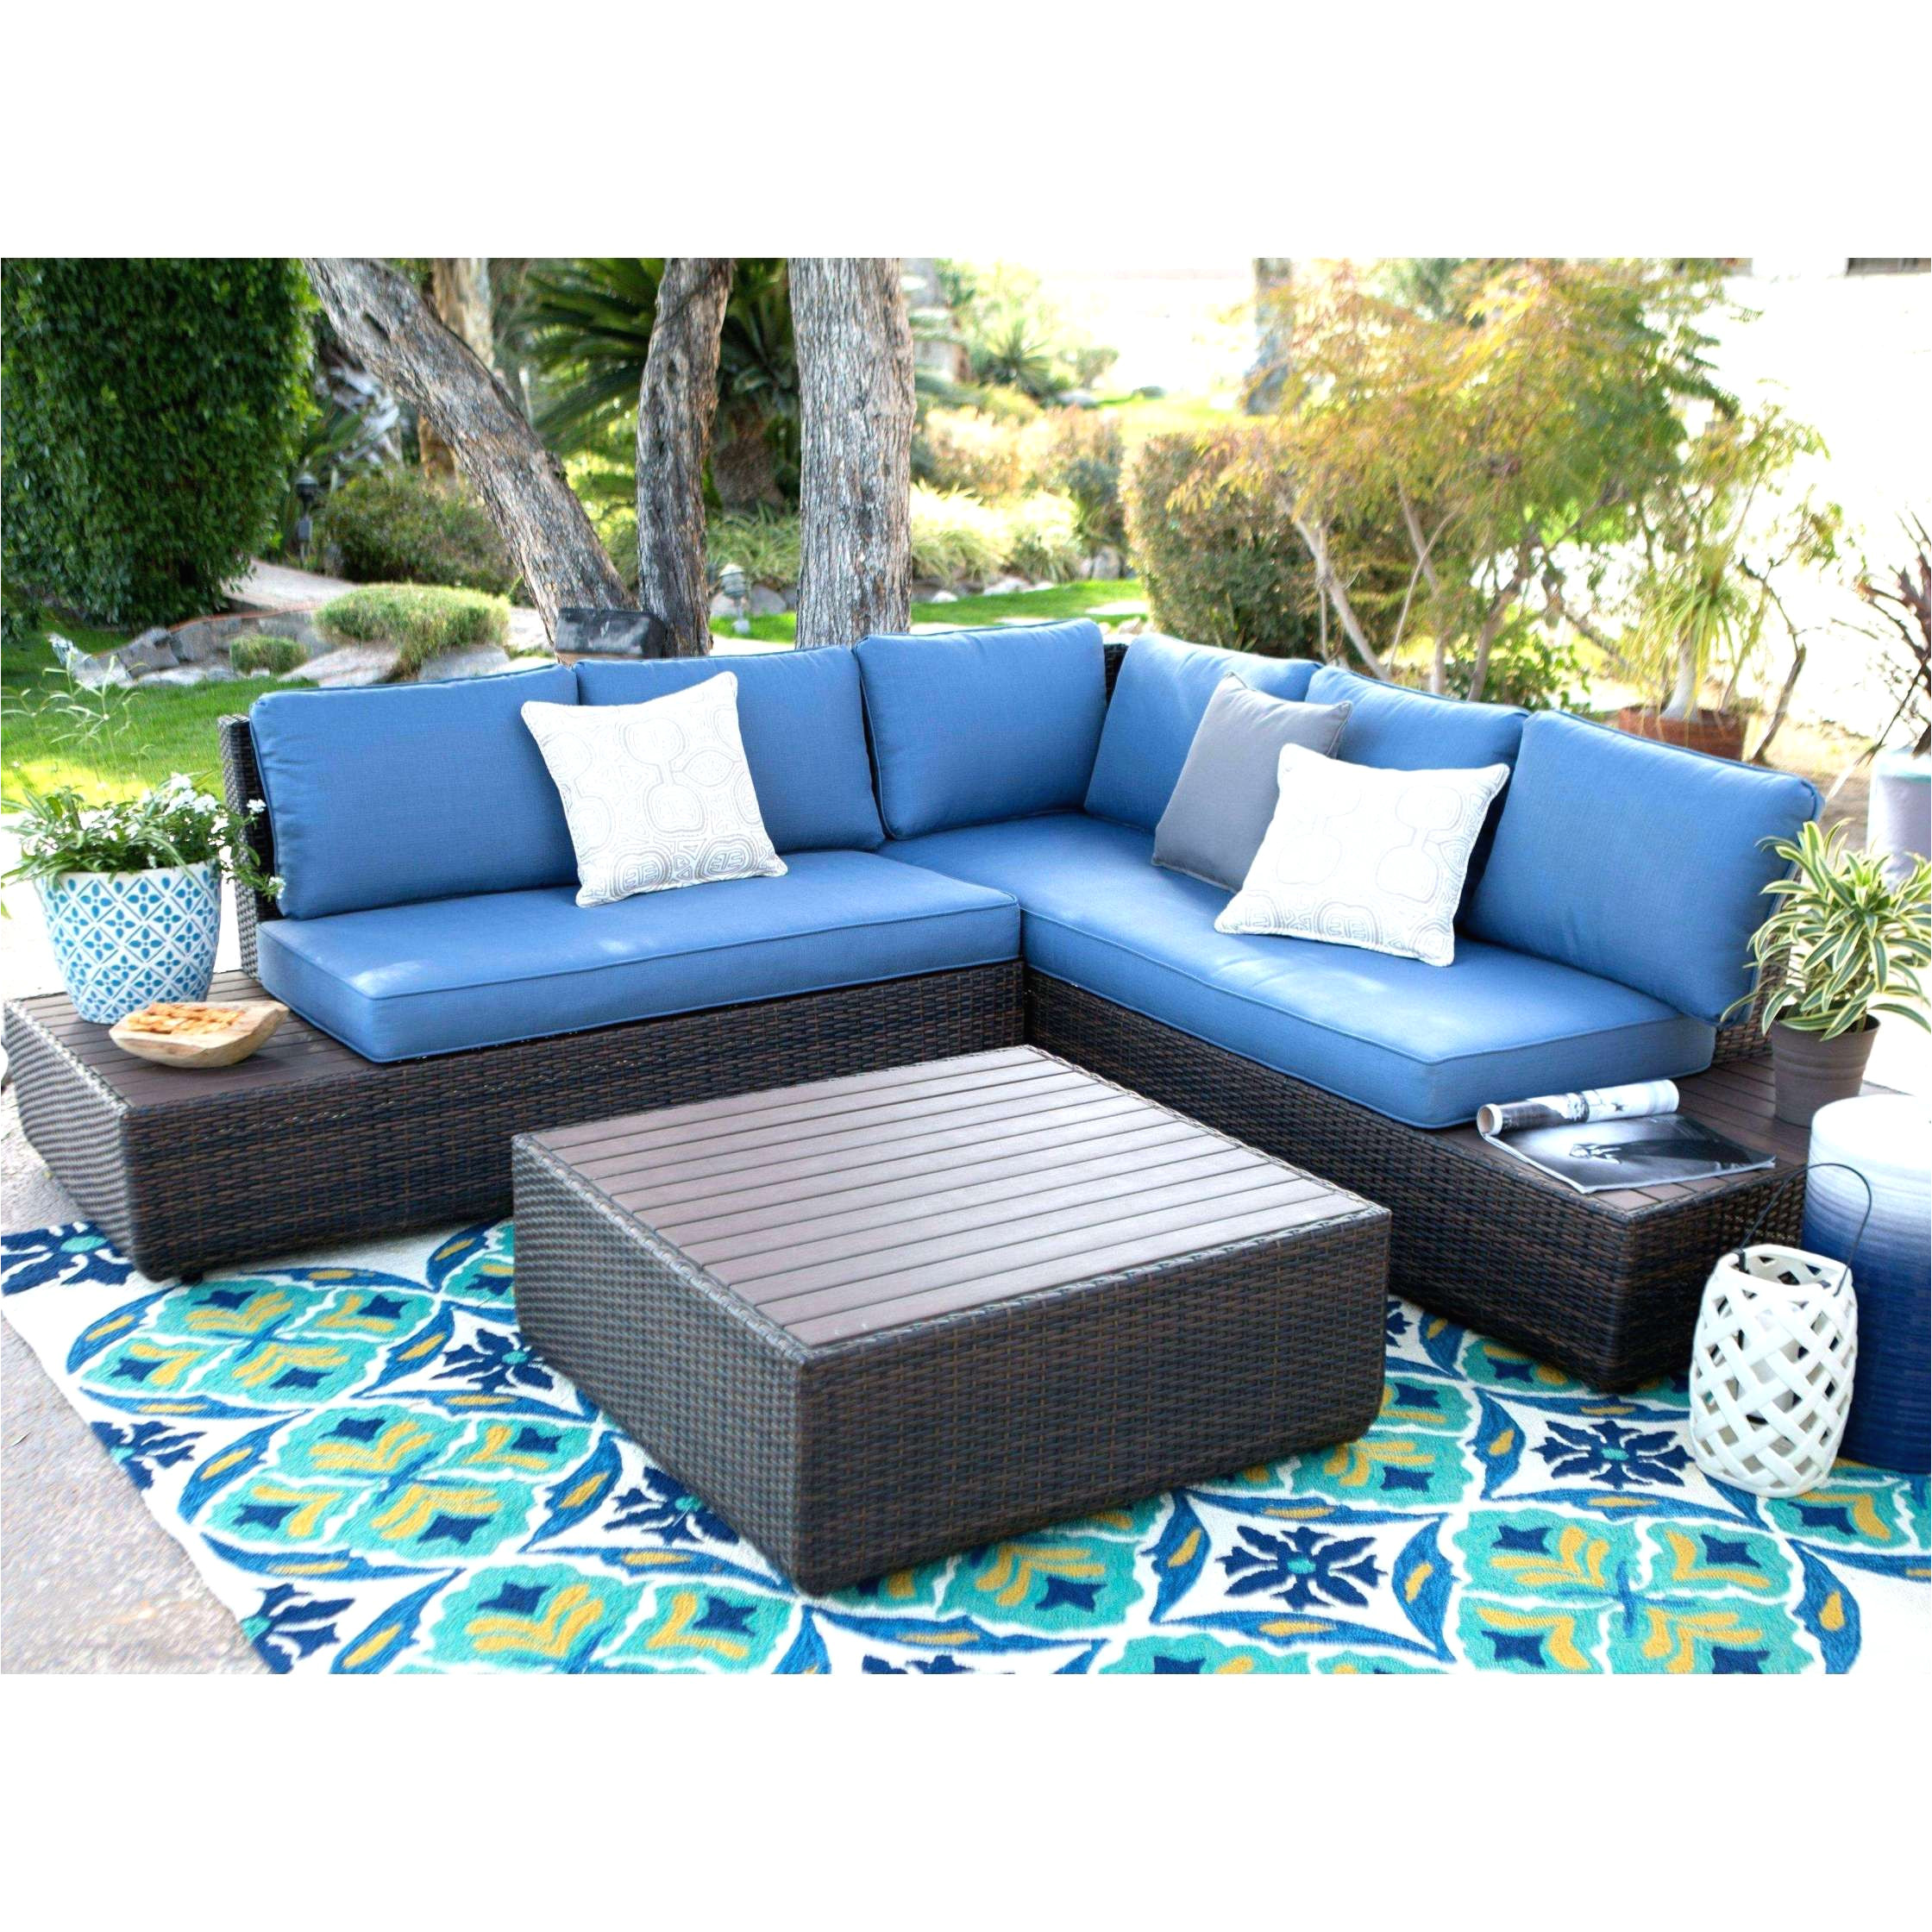 attractive replacement outdoor patio cushions within patio furniture sling chairs lovely wicker outdoor sofa 0d patio